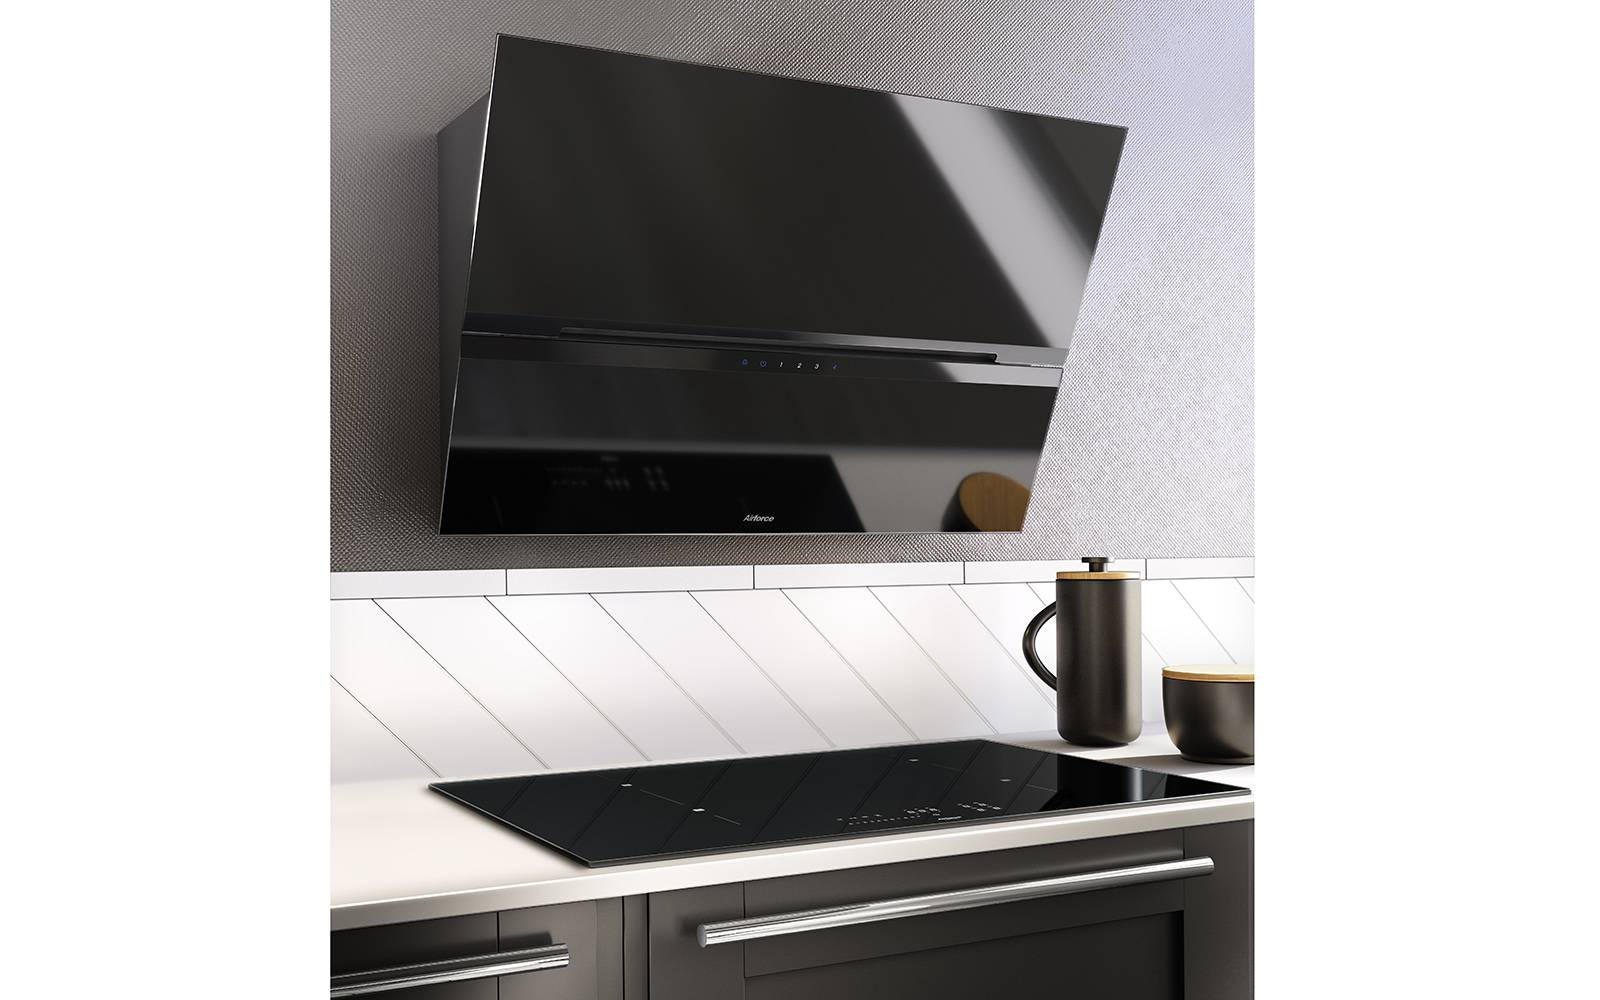 Airforce F179 80cm Wall Mounted Cooker Hood with Touch Control- Black Glass Finish